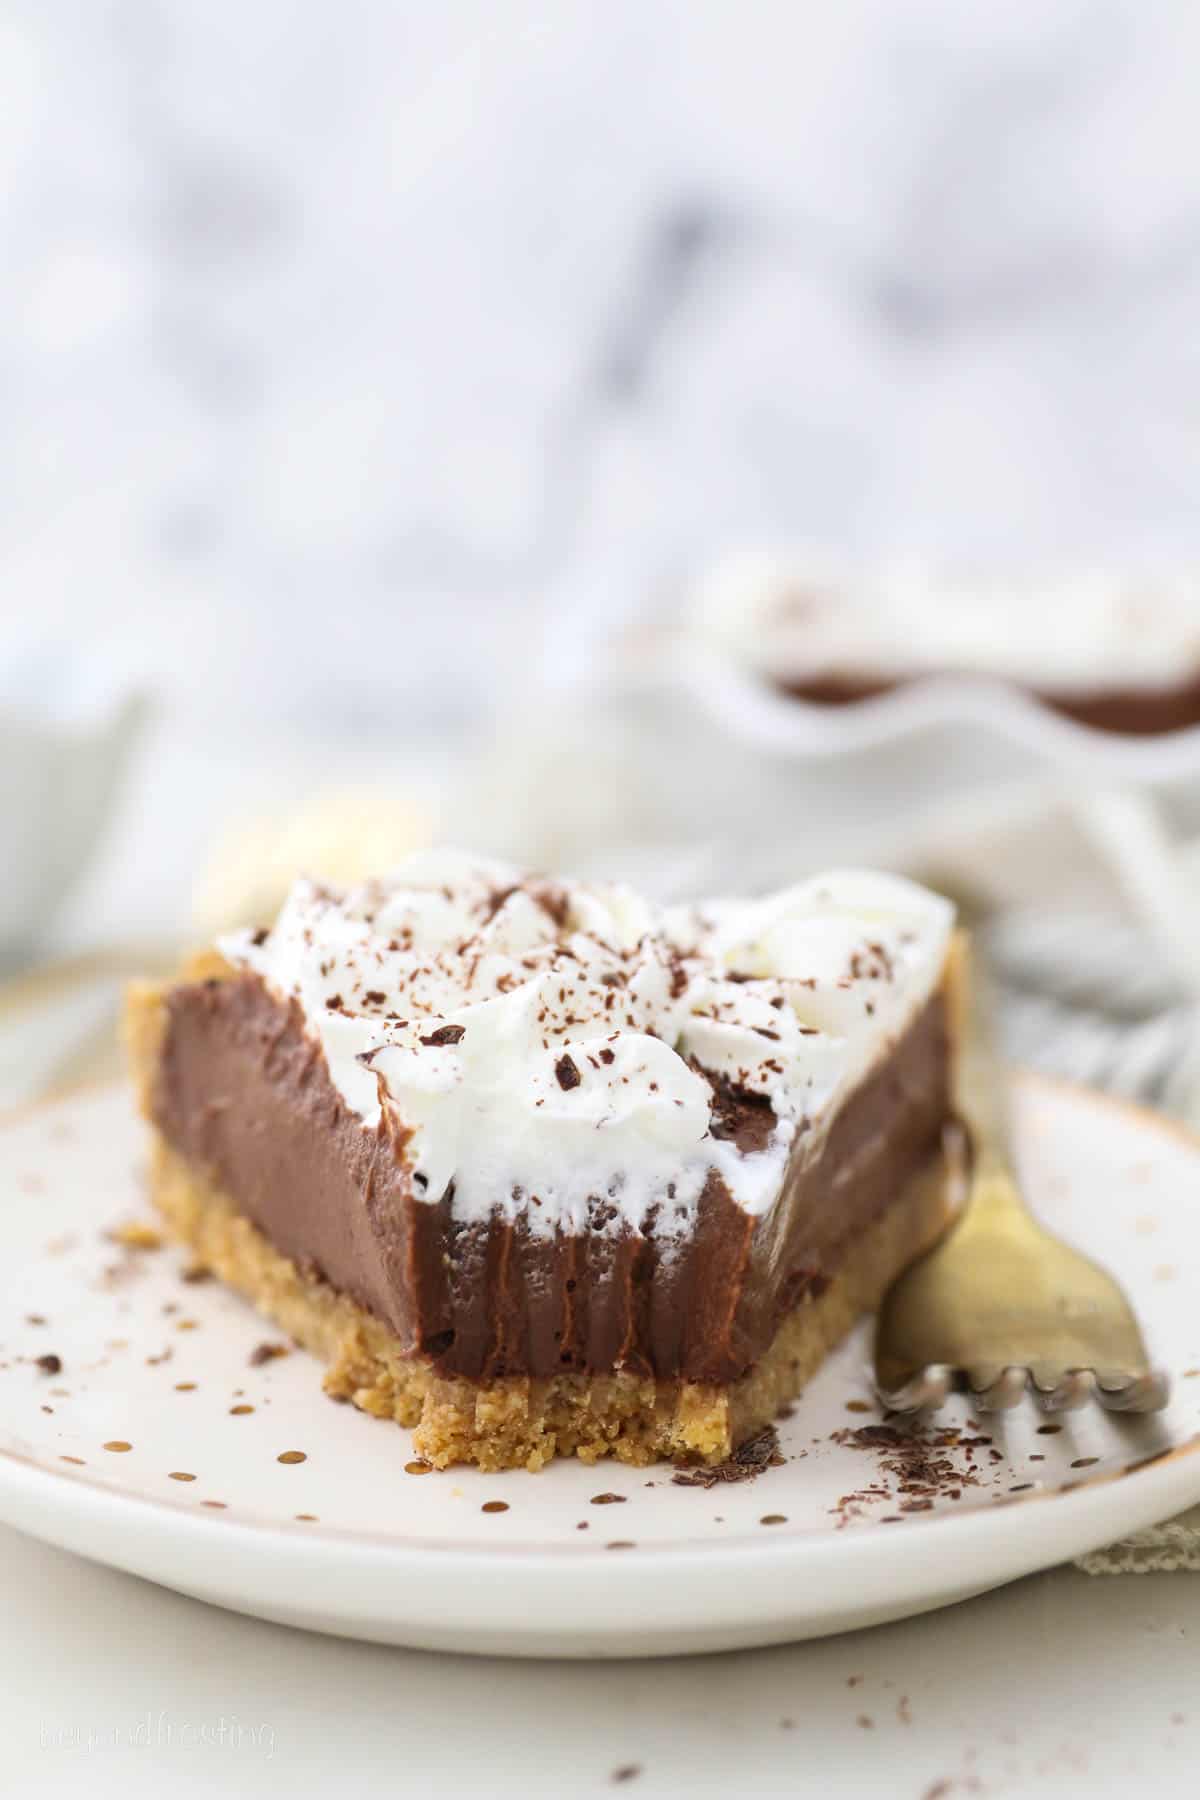 A slice of chocolate pudding pie on a polka dot plate with a bite missing and a gold fork next to it